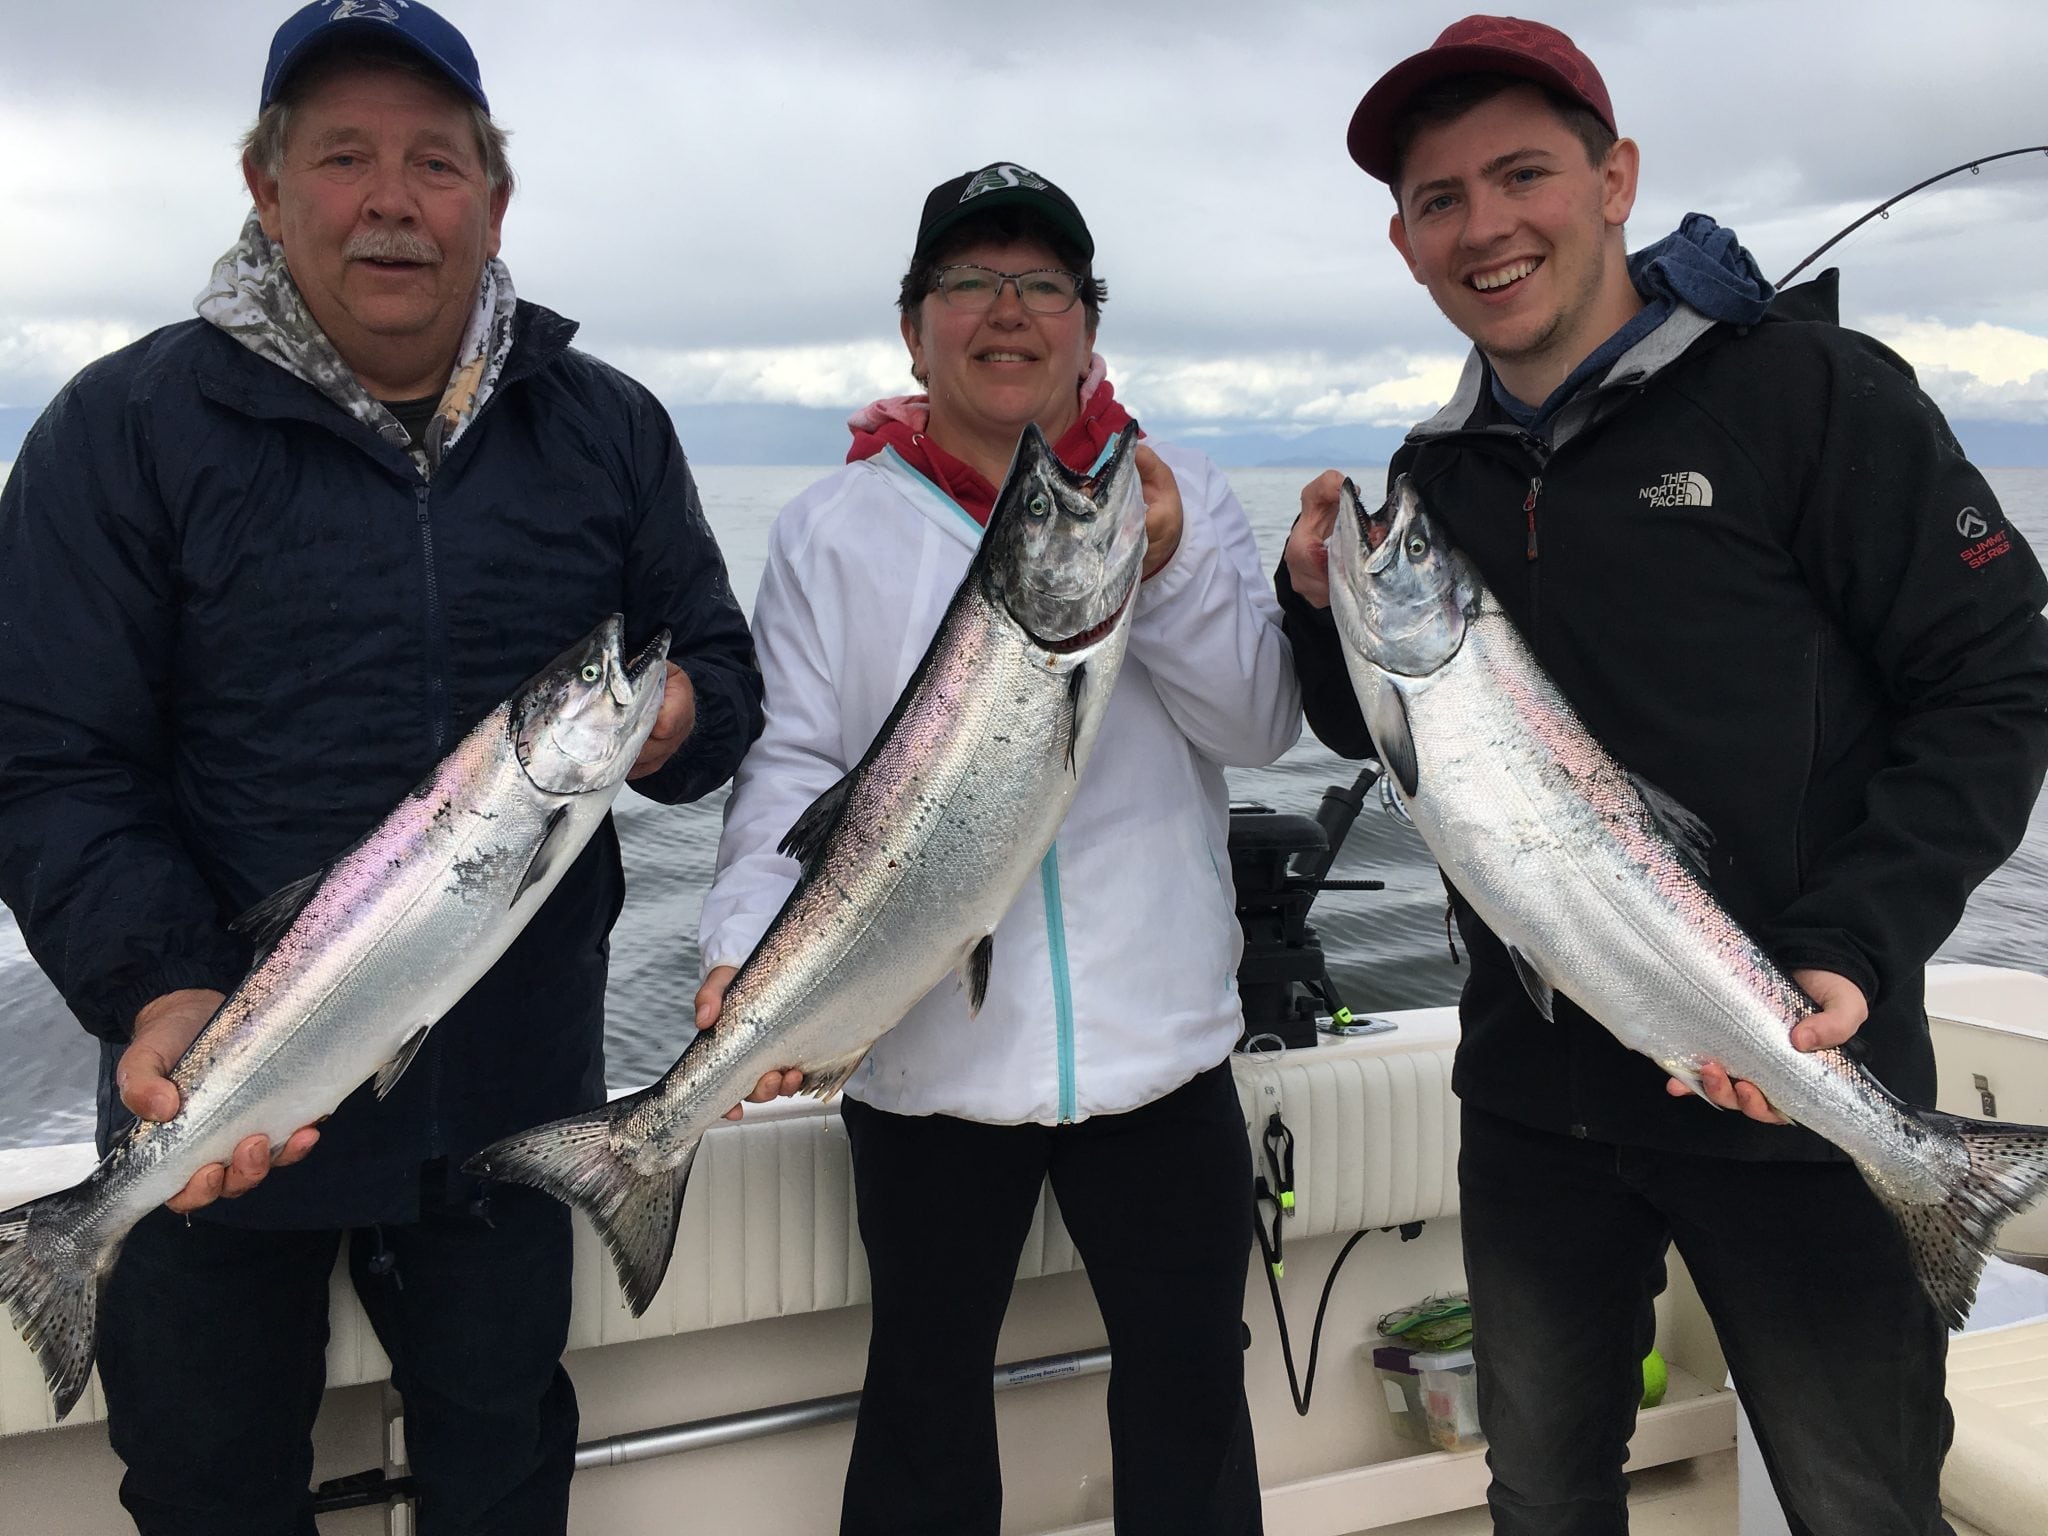 From Vancouver to Thrasher Rock, this is a successful family salmon fishing trip